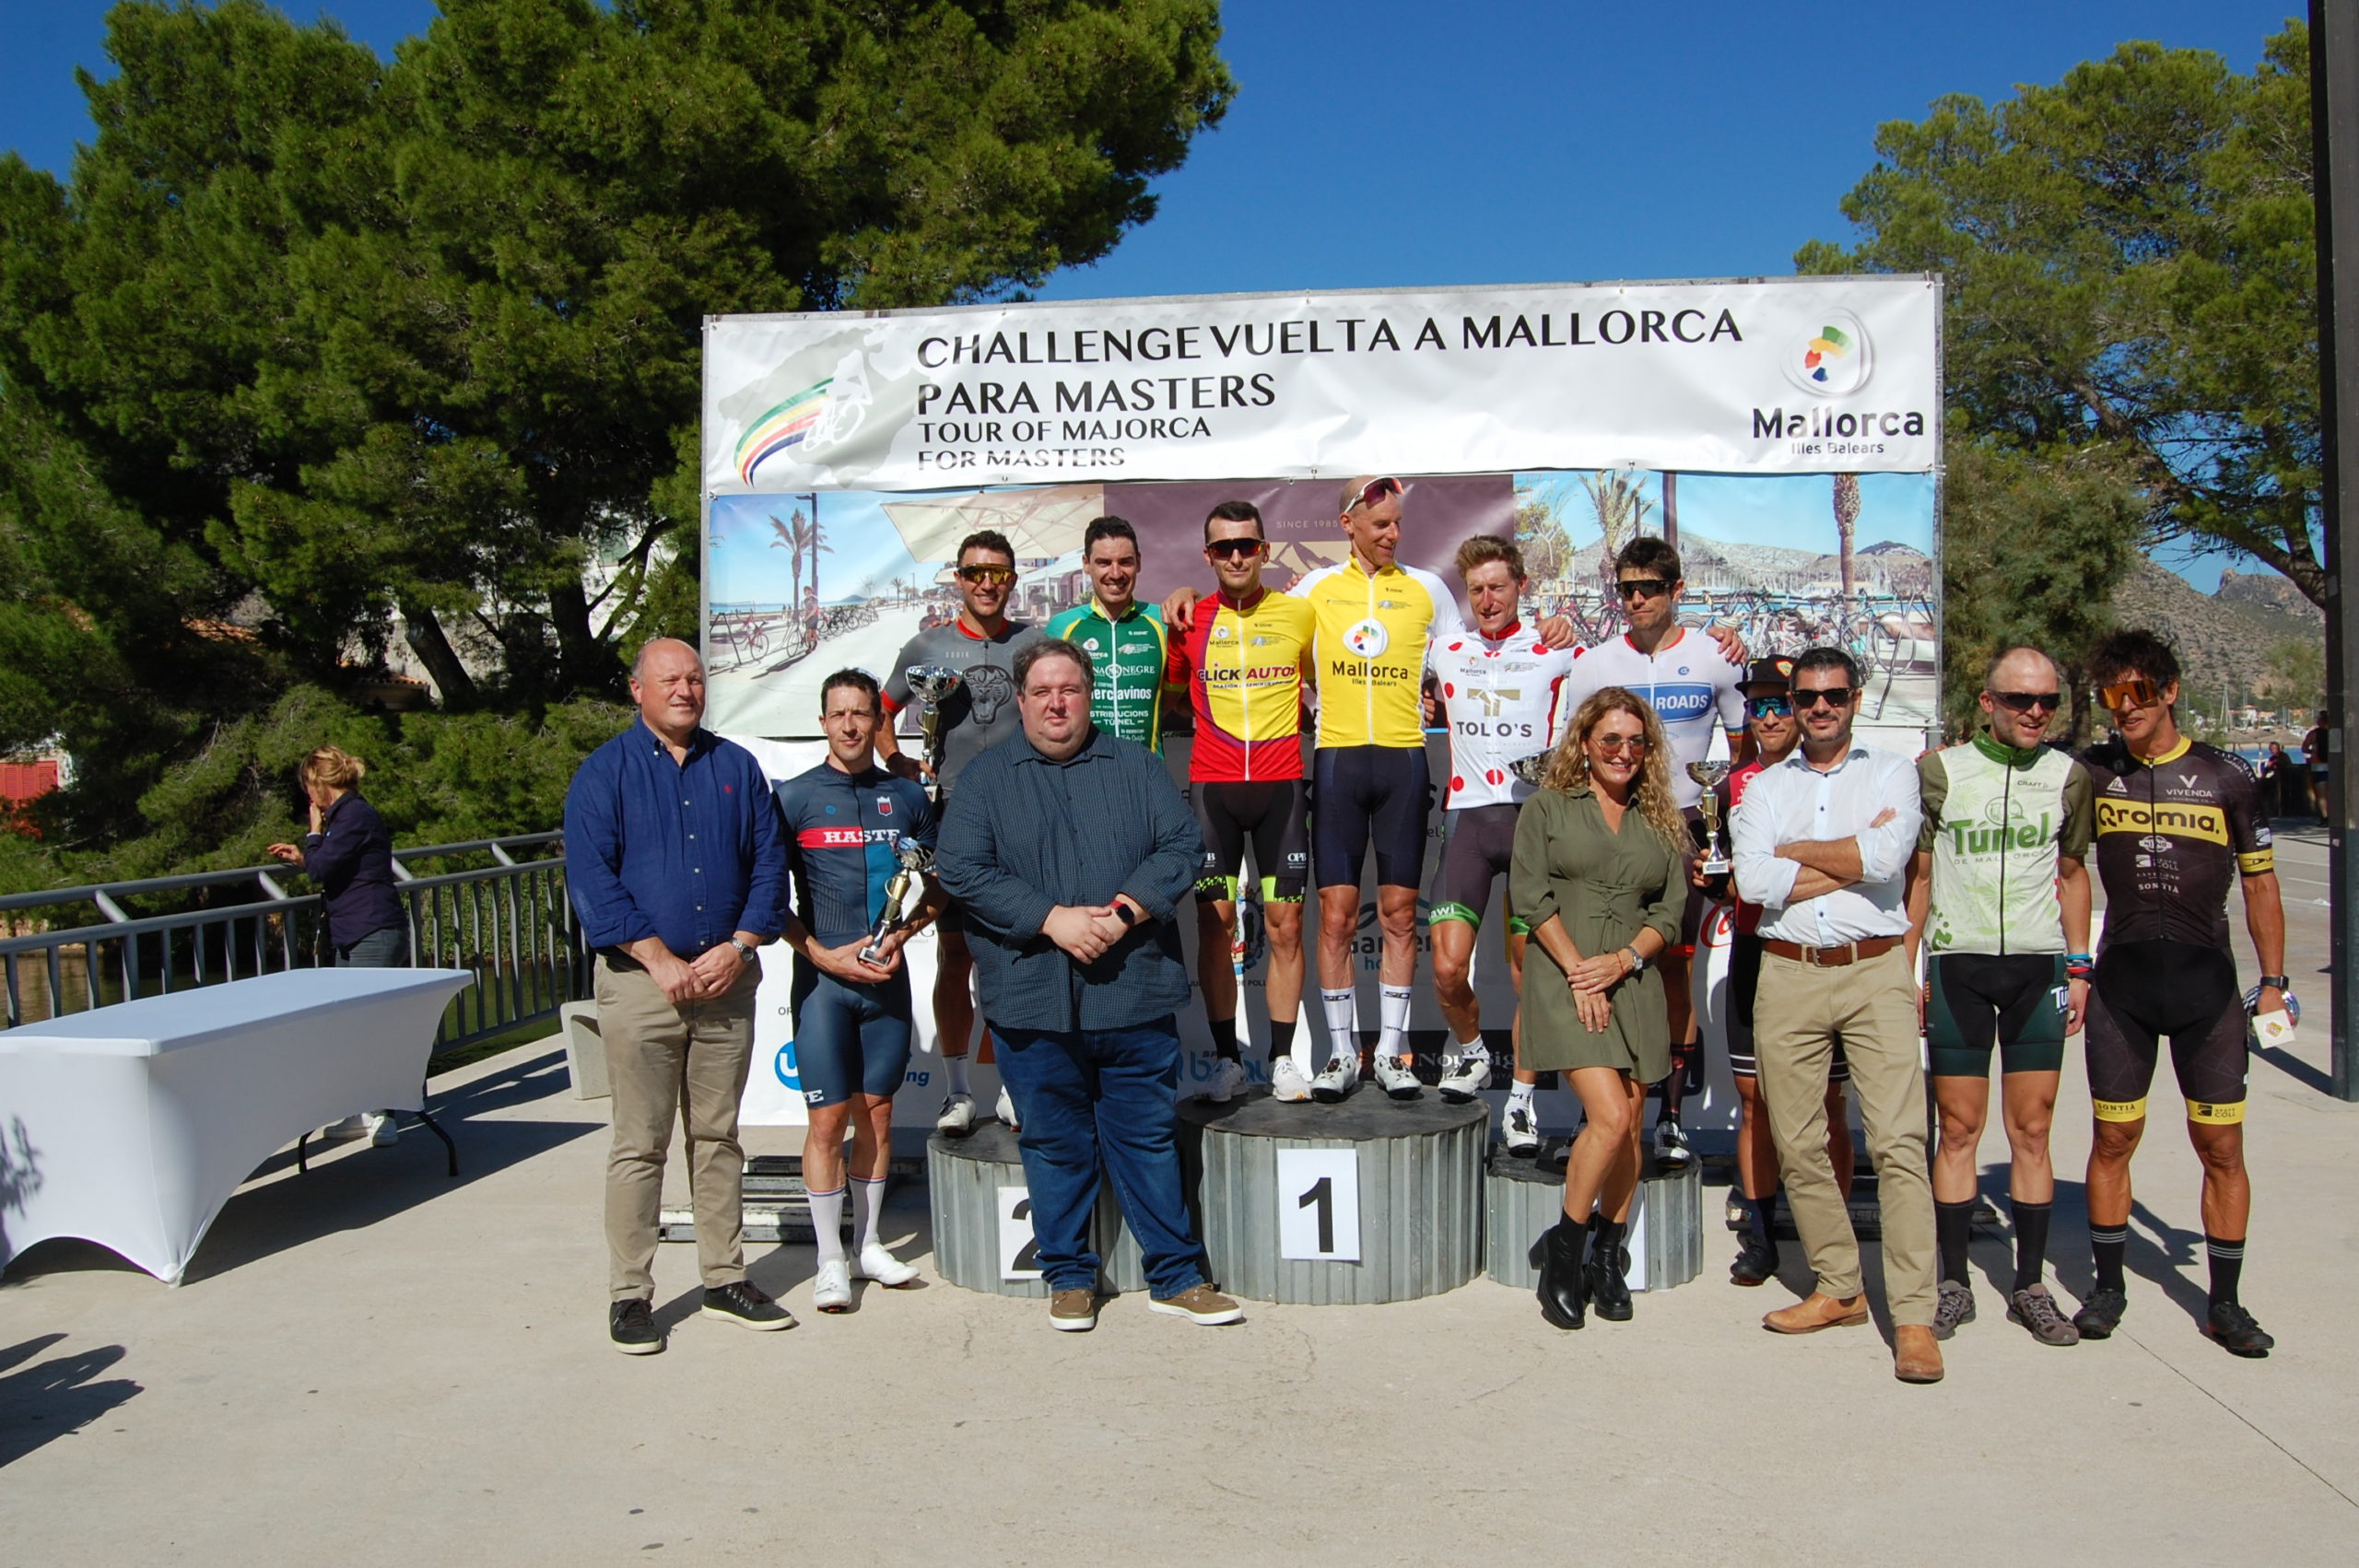 Óscar Negrete, in Masters 50-60, and Chris McNamara, in Masters 30-40, winners of the Challenge